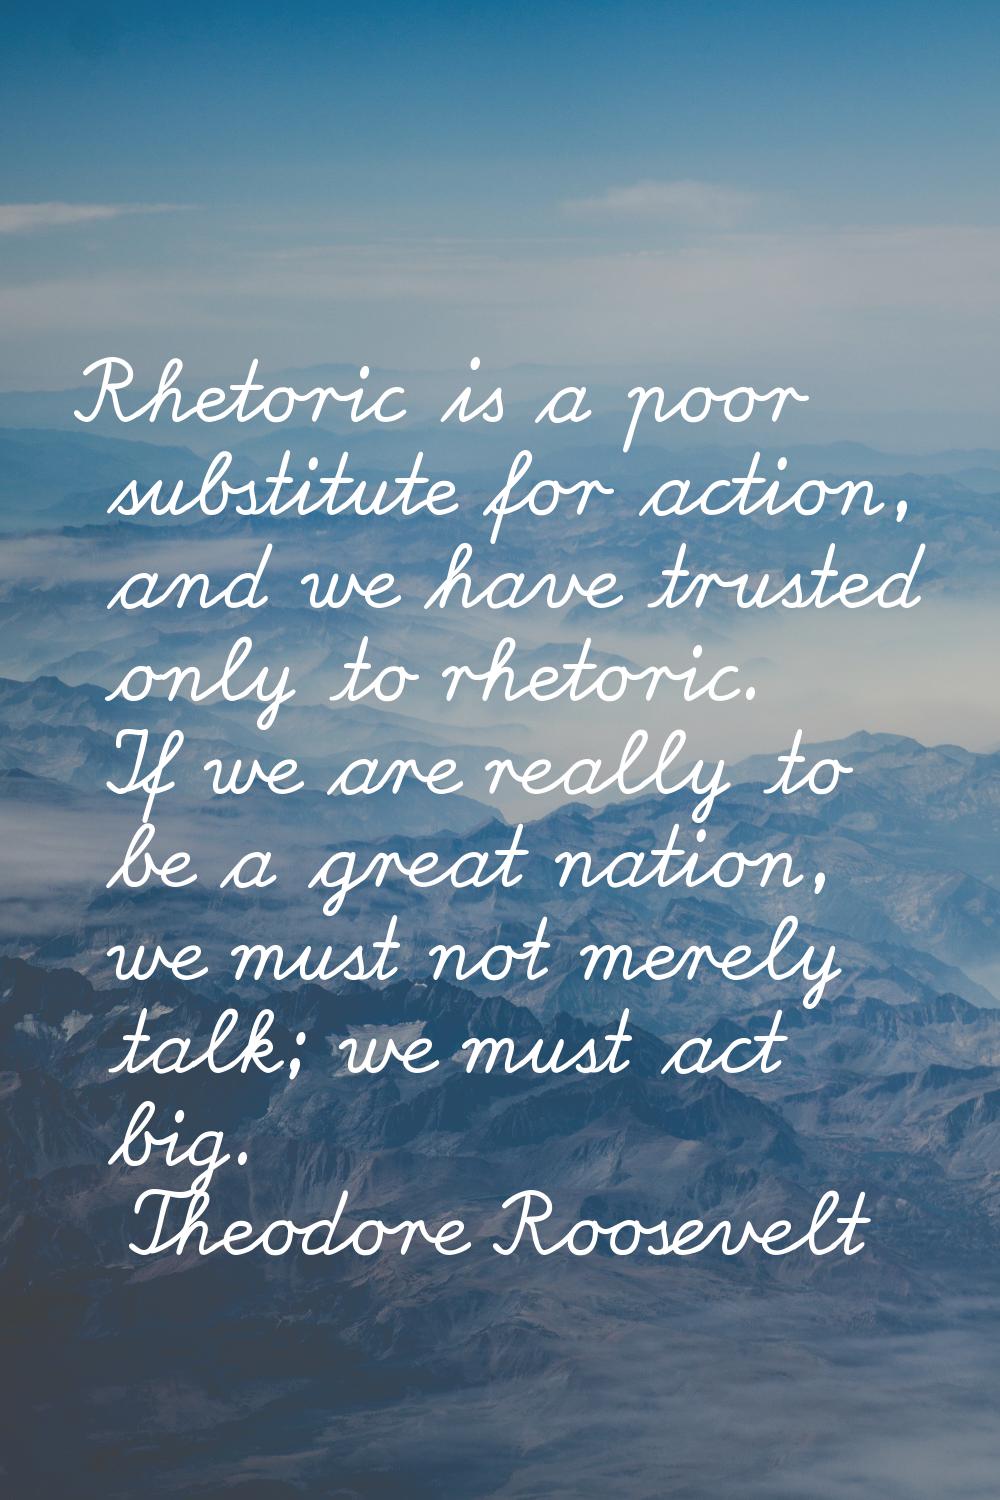 Rhetoric is a poor substitute for action, and we have trusted only to rhetoric. If we are really to